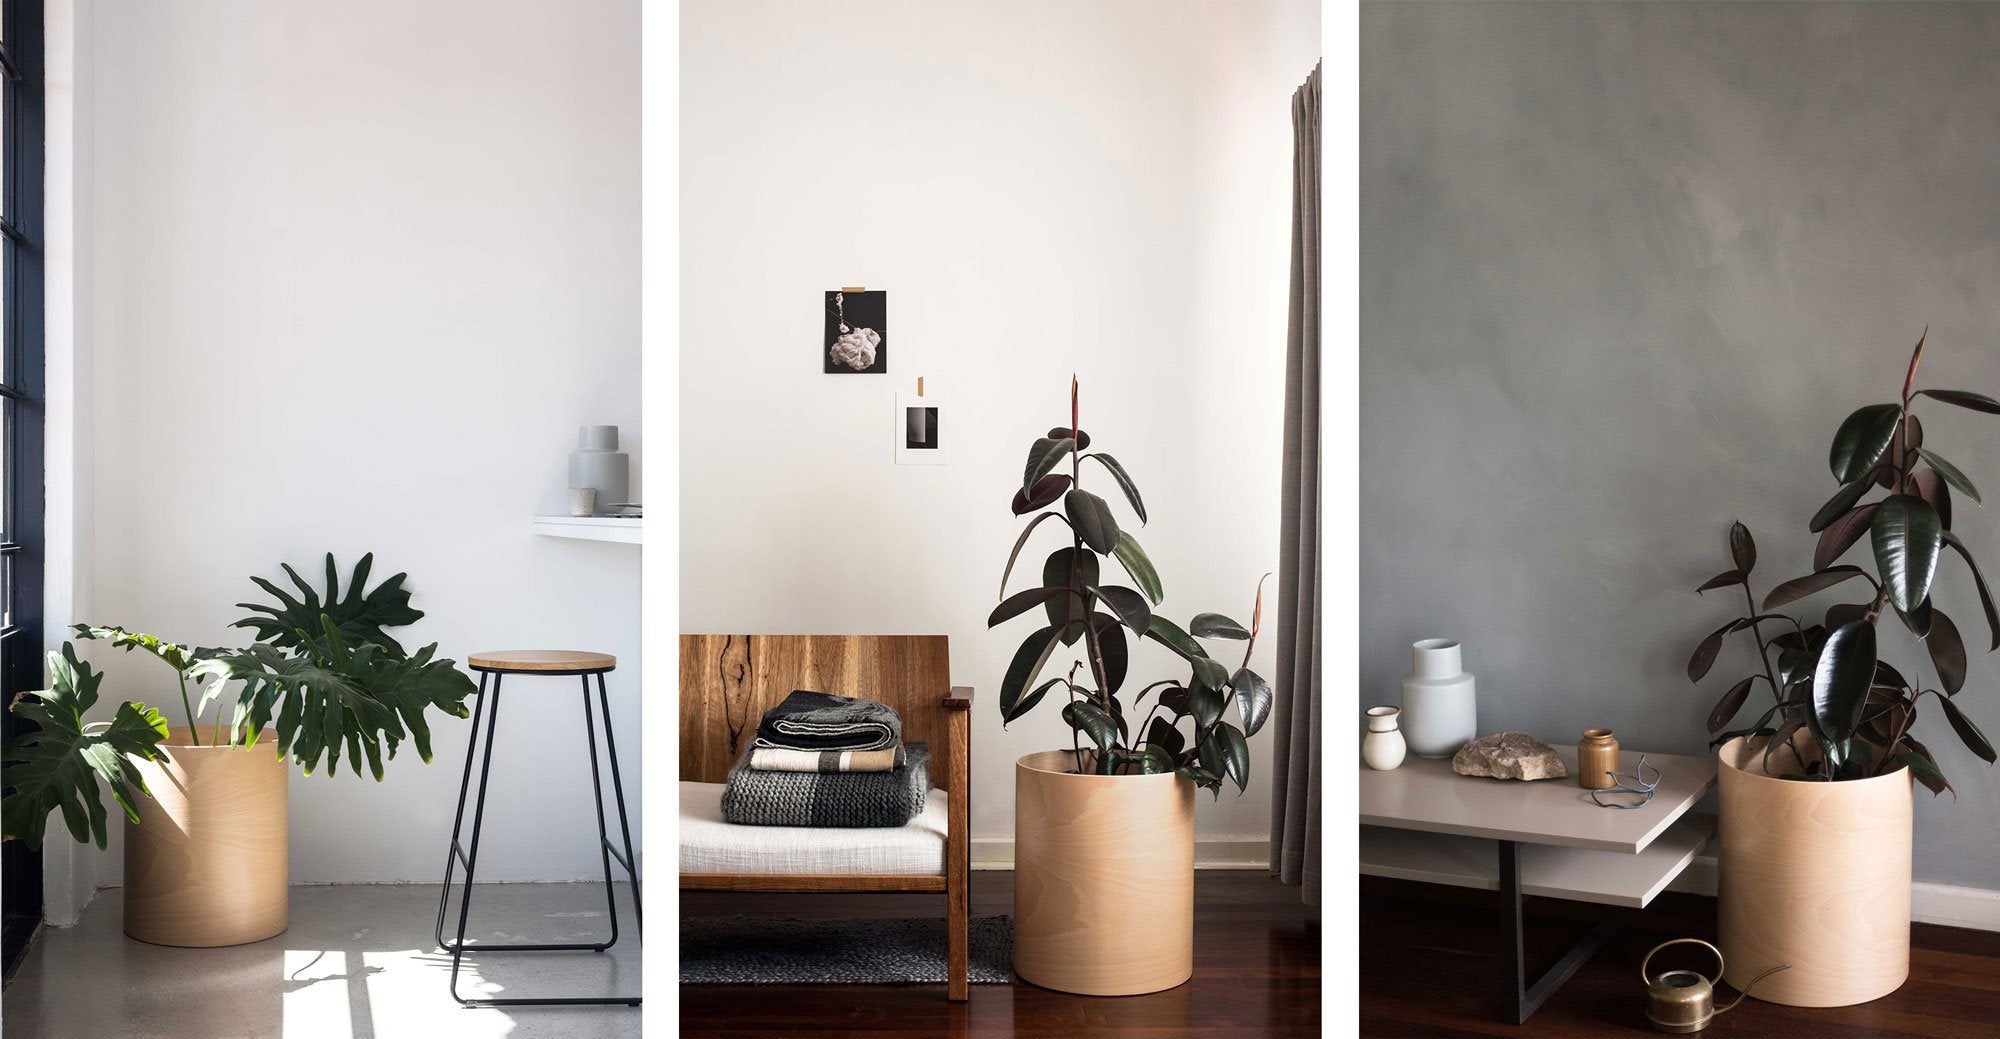 Natural light, indoor plants and modern furniture styled by Meghan Plowman